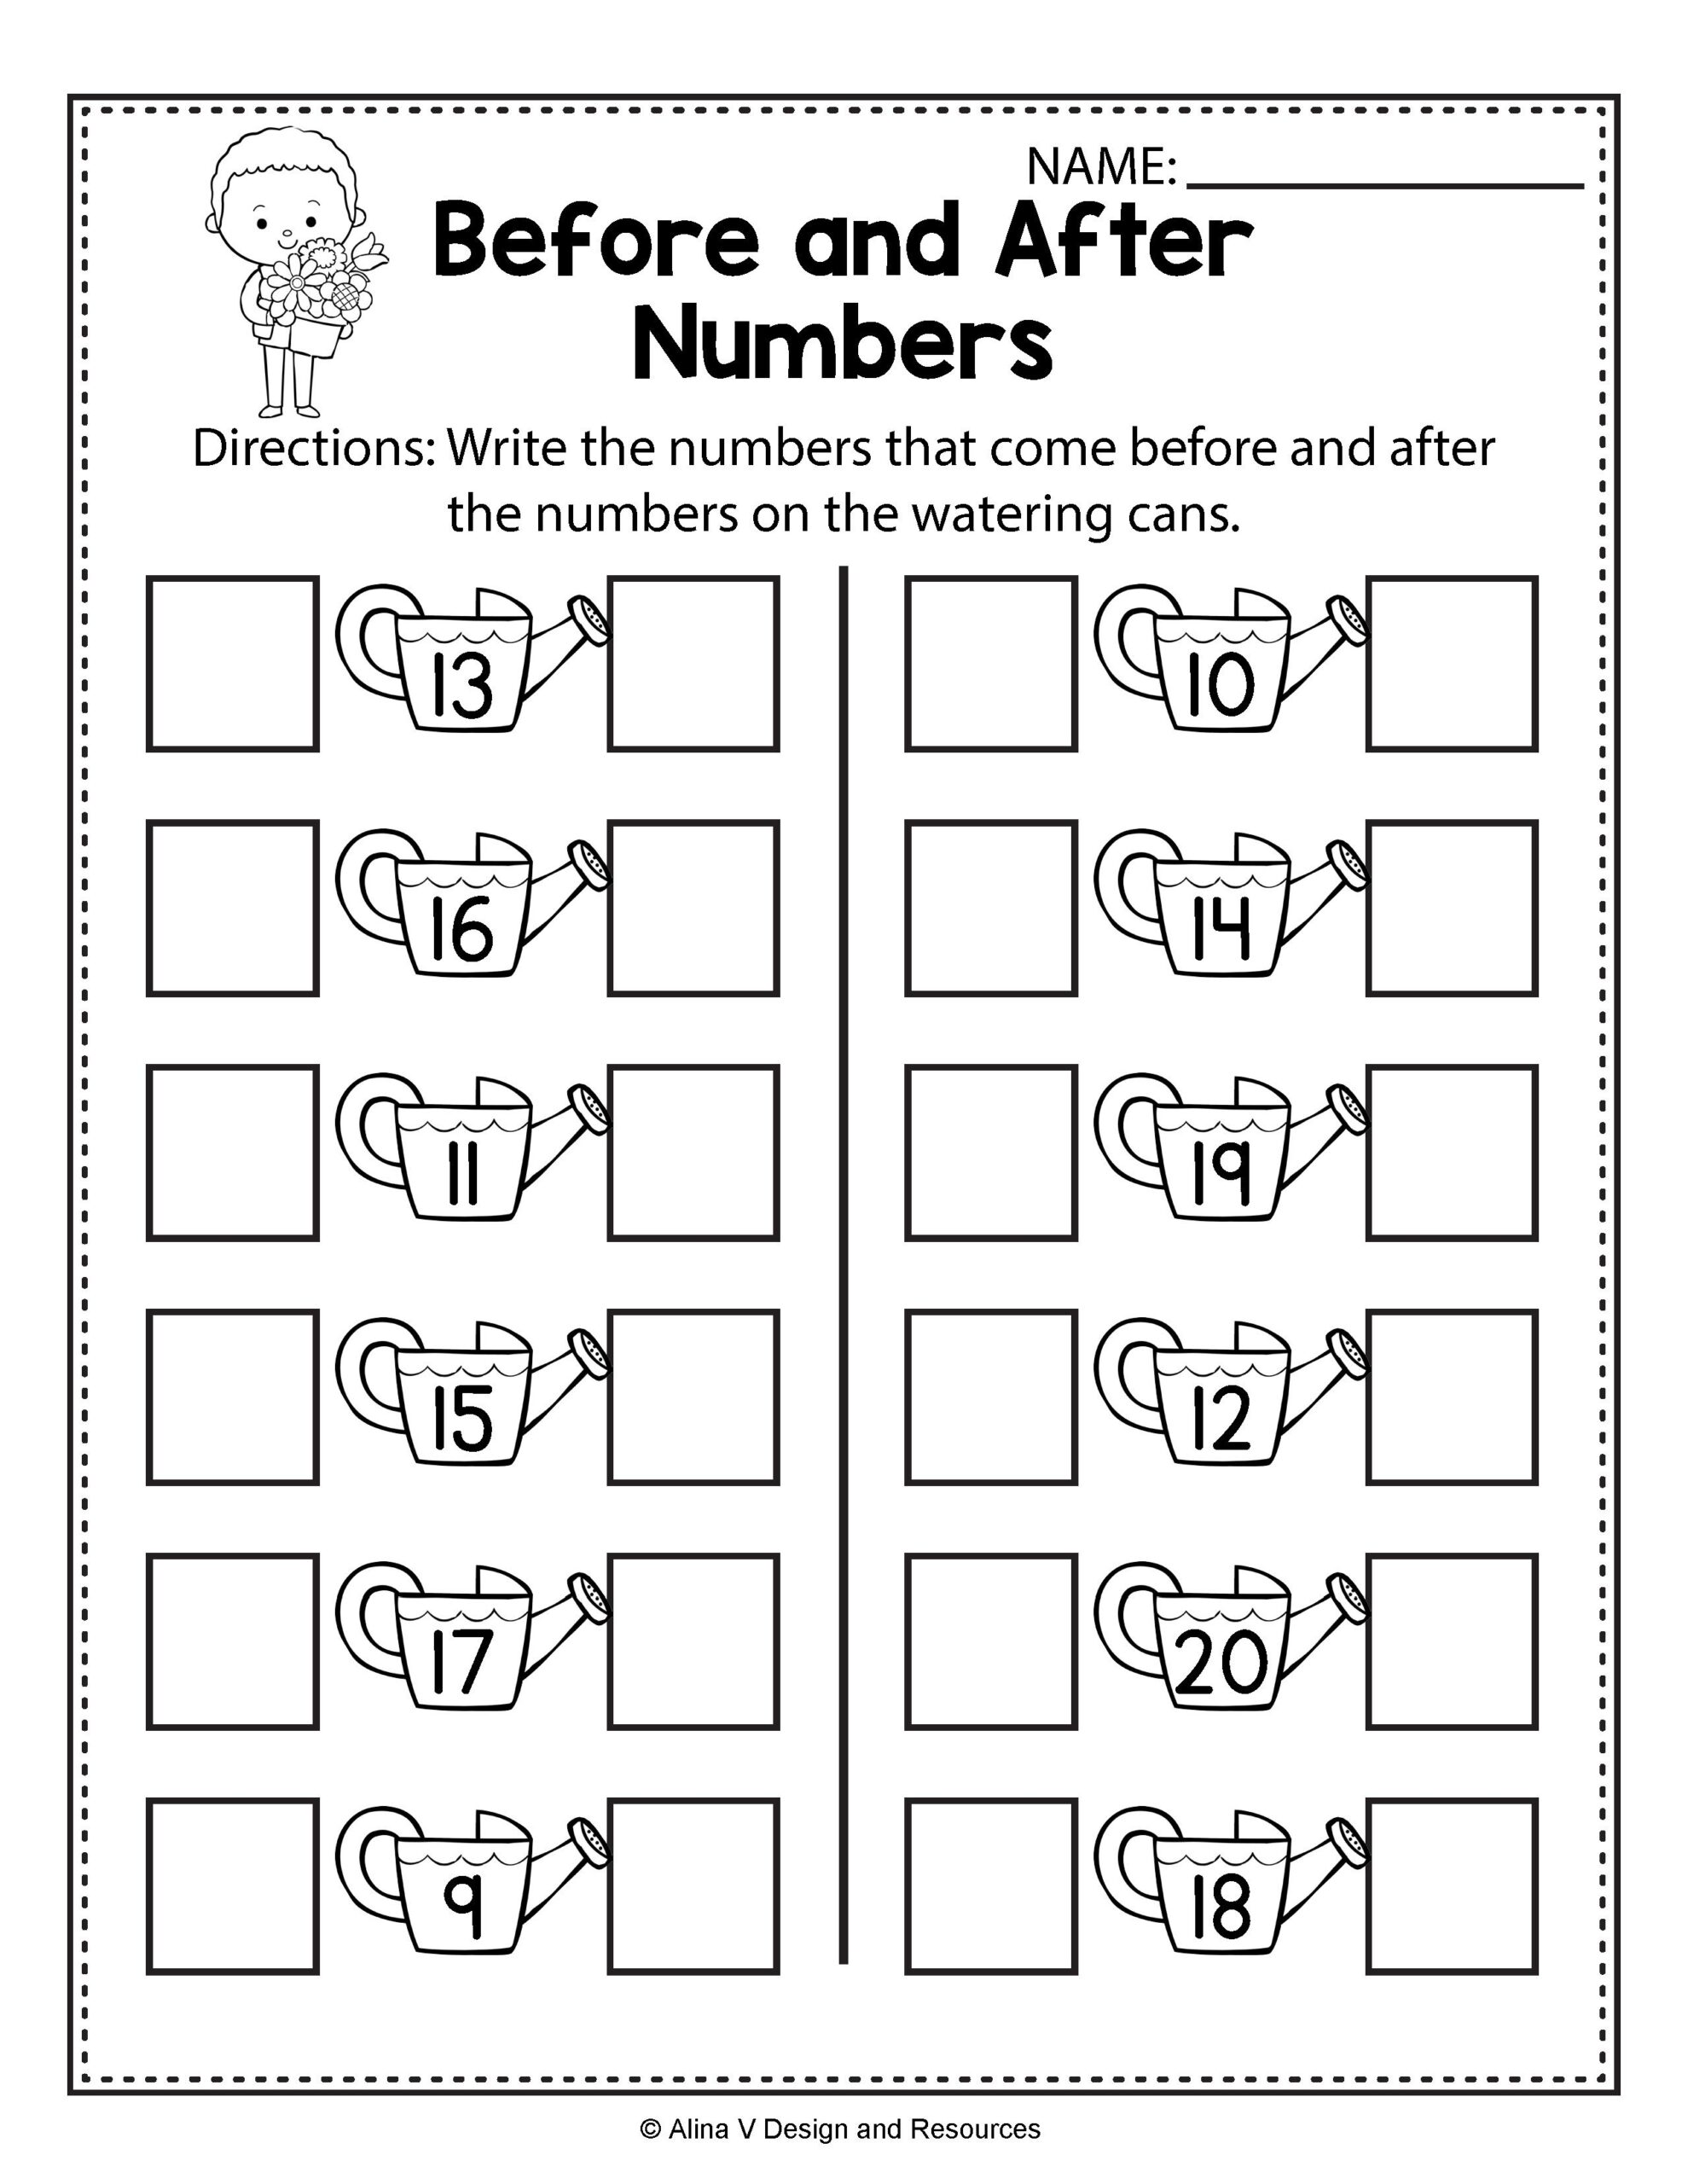 Before And After Numbers Spring Math Worksheets And Activities For Prescho Spring Math Worksheets Free Printable Math Worksheets Kindergarten Math Worksheets